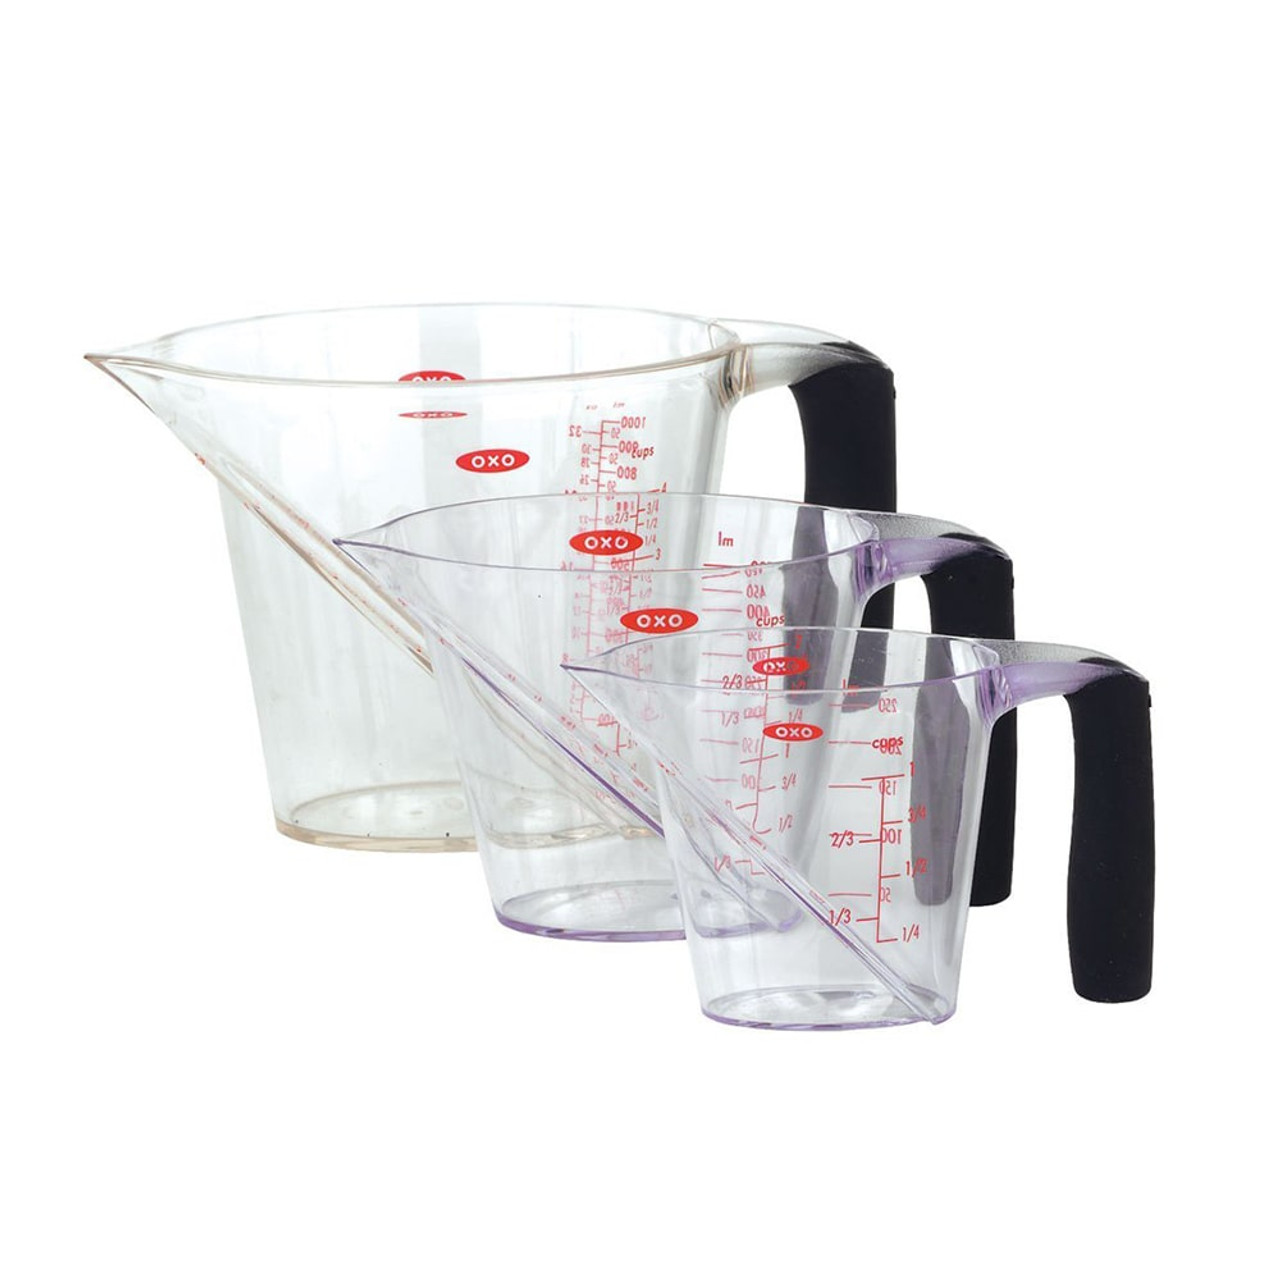 https://cdn11.bigcommerce.com/s-hccytny0od/images/stencil/1280x1280/products/1476/5311/oxo-good-grips-3-piece-angled-measuring-cup-set__89724.1594305792.jpg?c=2?imbypass=on